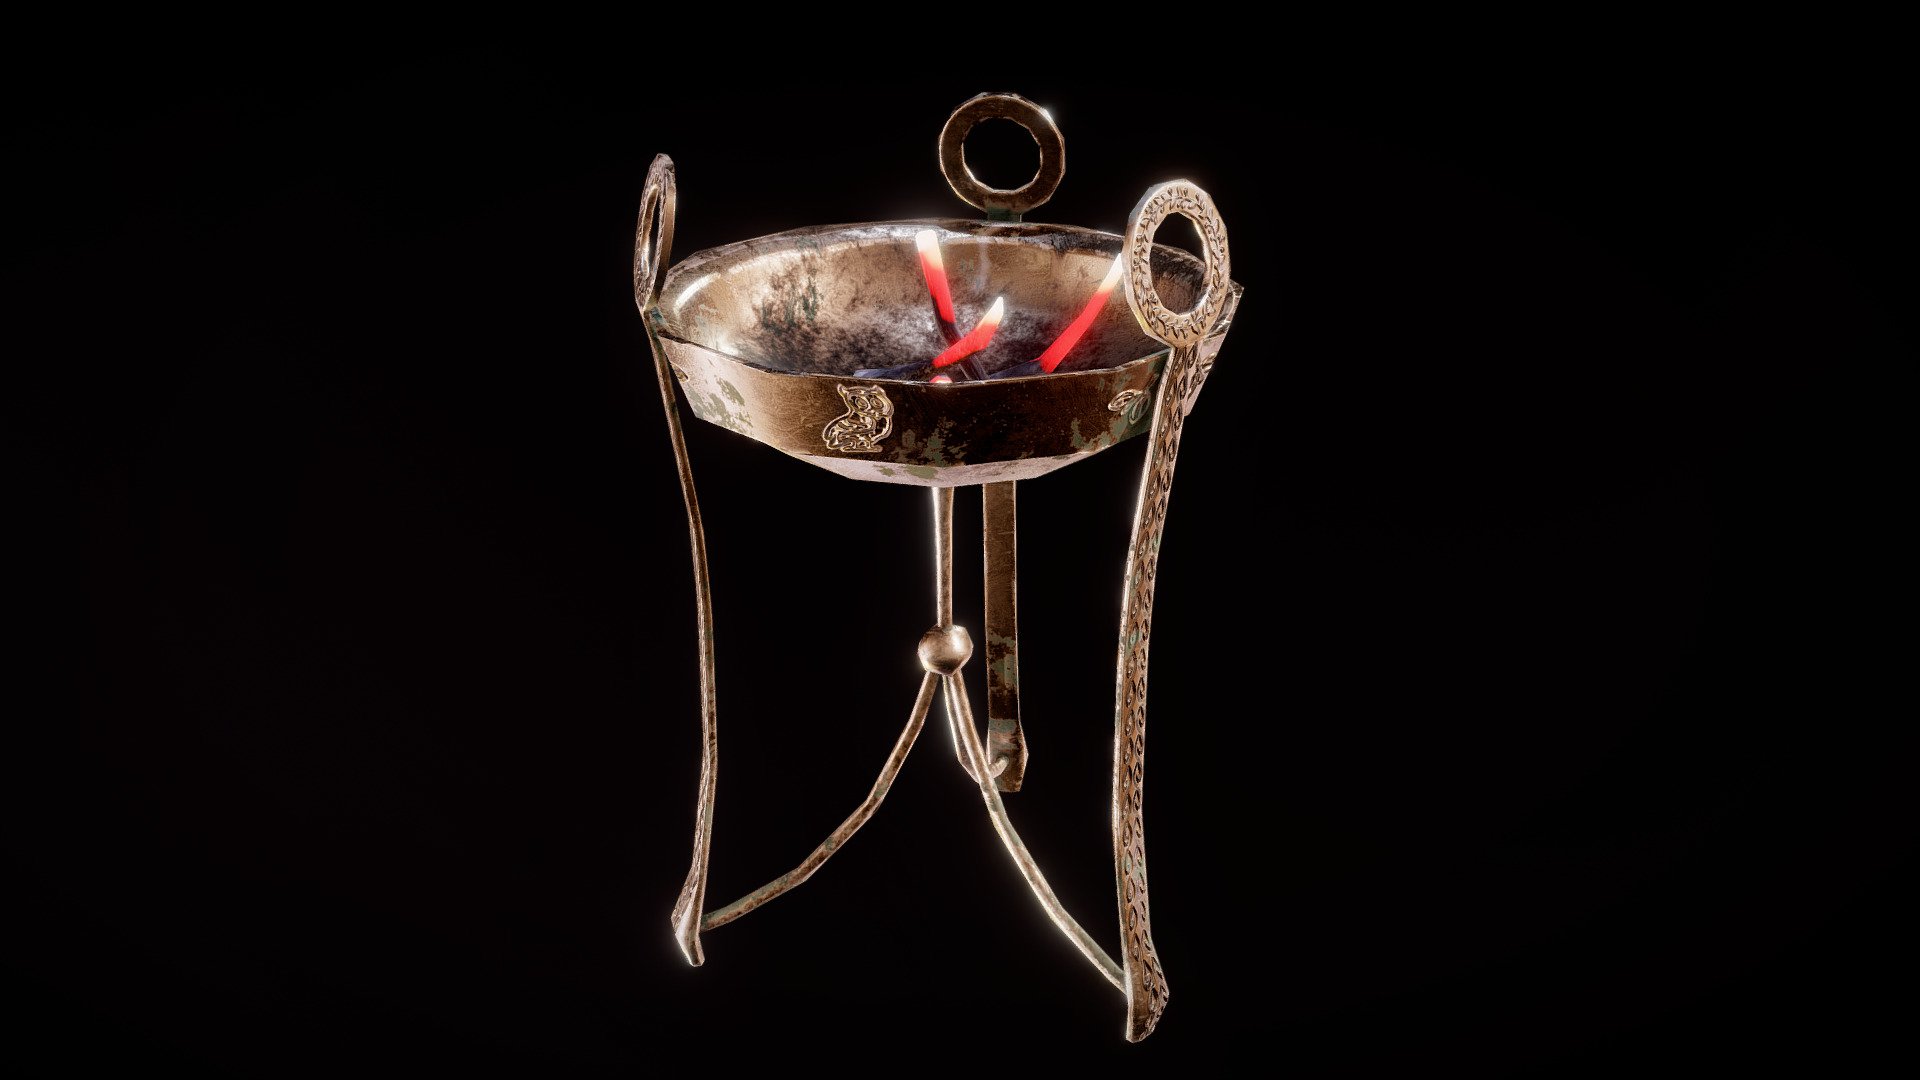 A tripod brazier made of tarnished bronze, complete with smouldering firewood. Add a fire effect to complete the asset 3d model